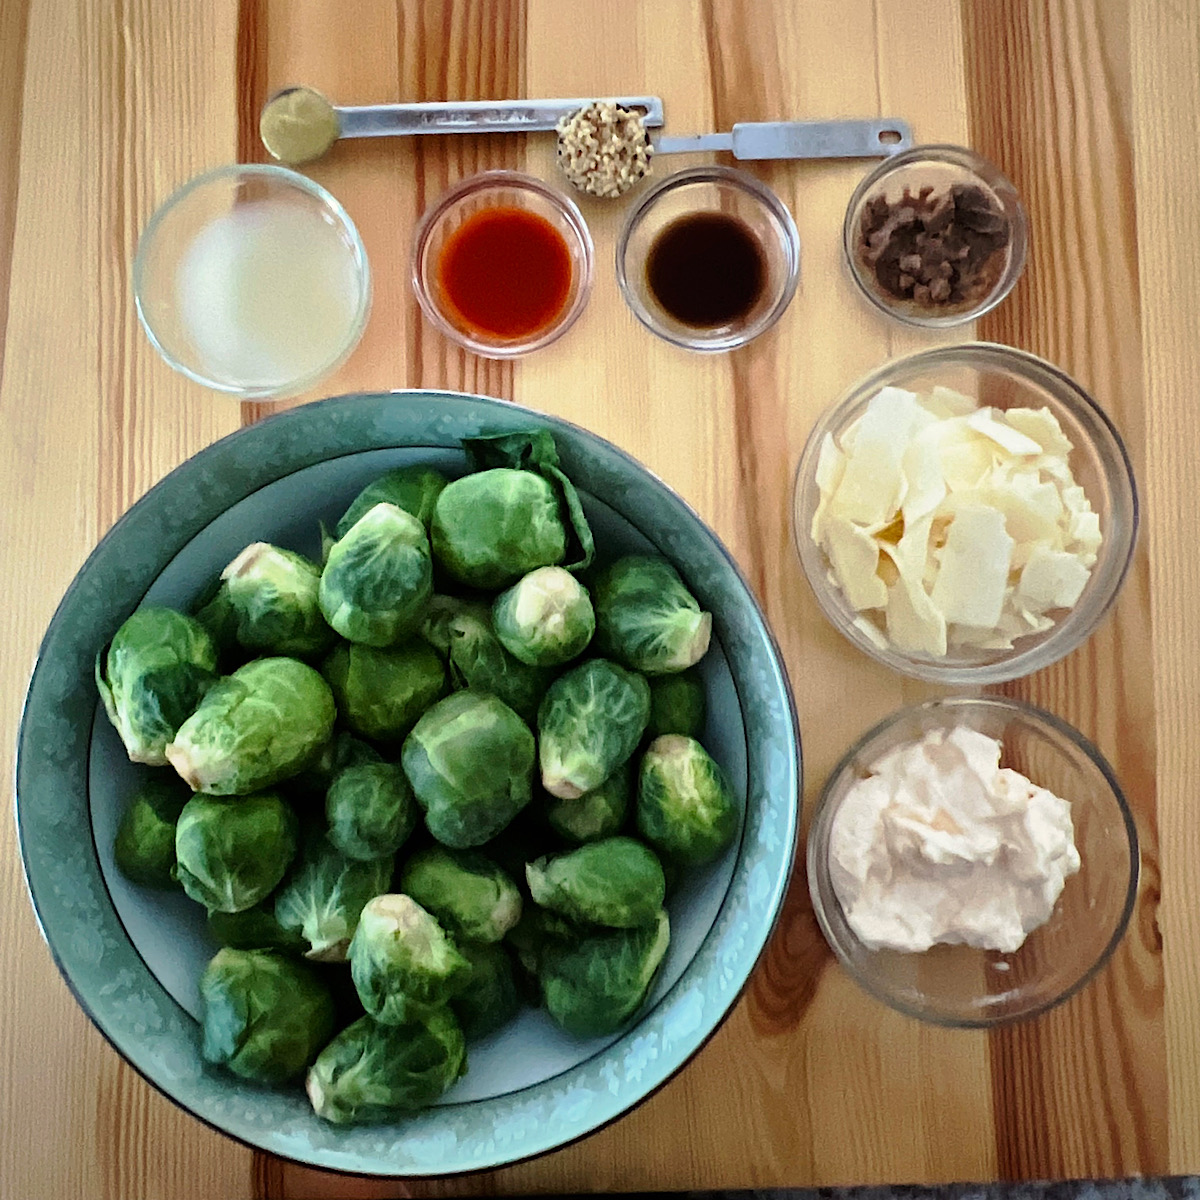 Ingredients for brussels sprouts caesar salad